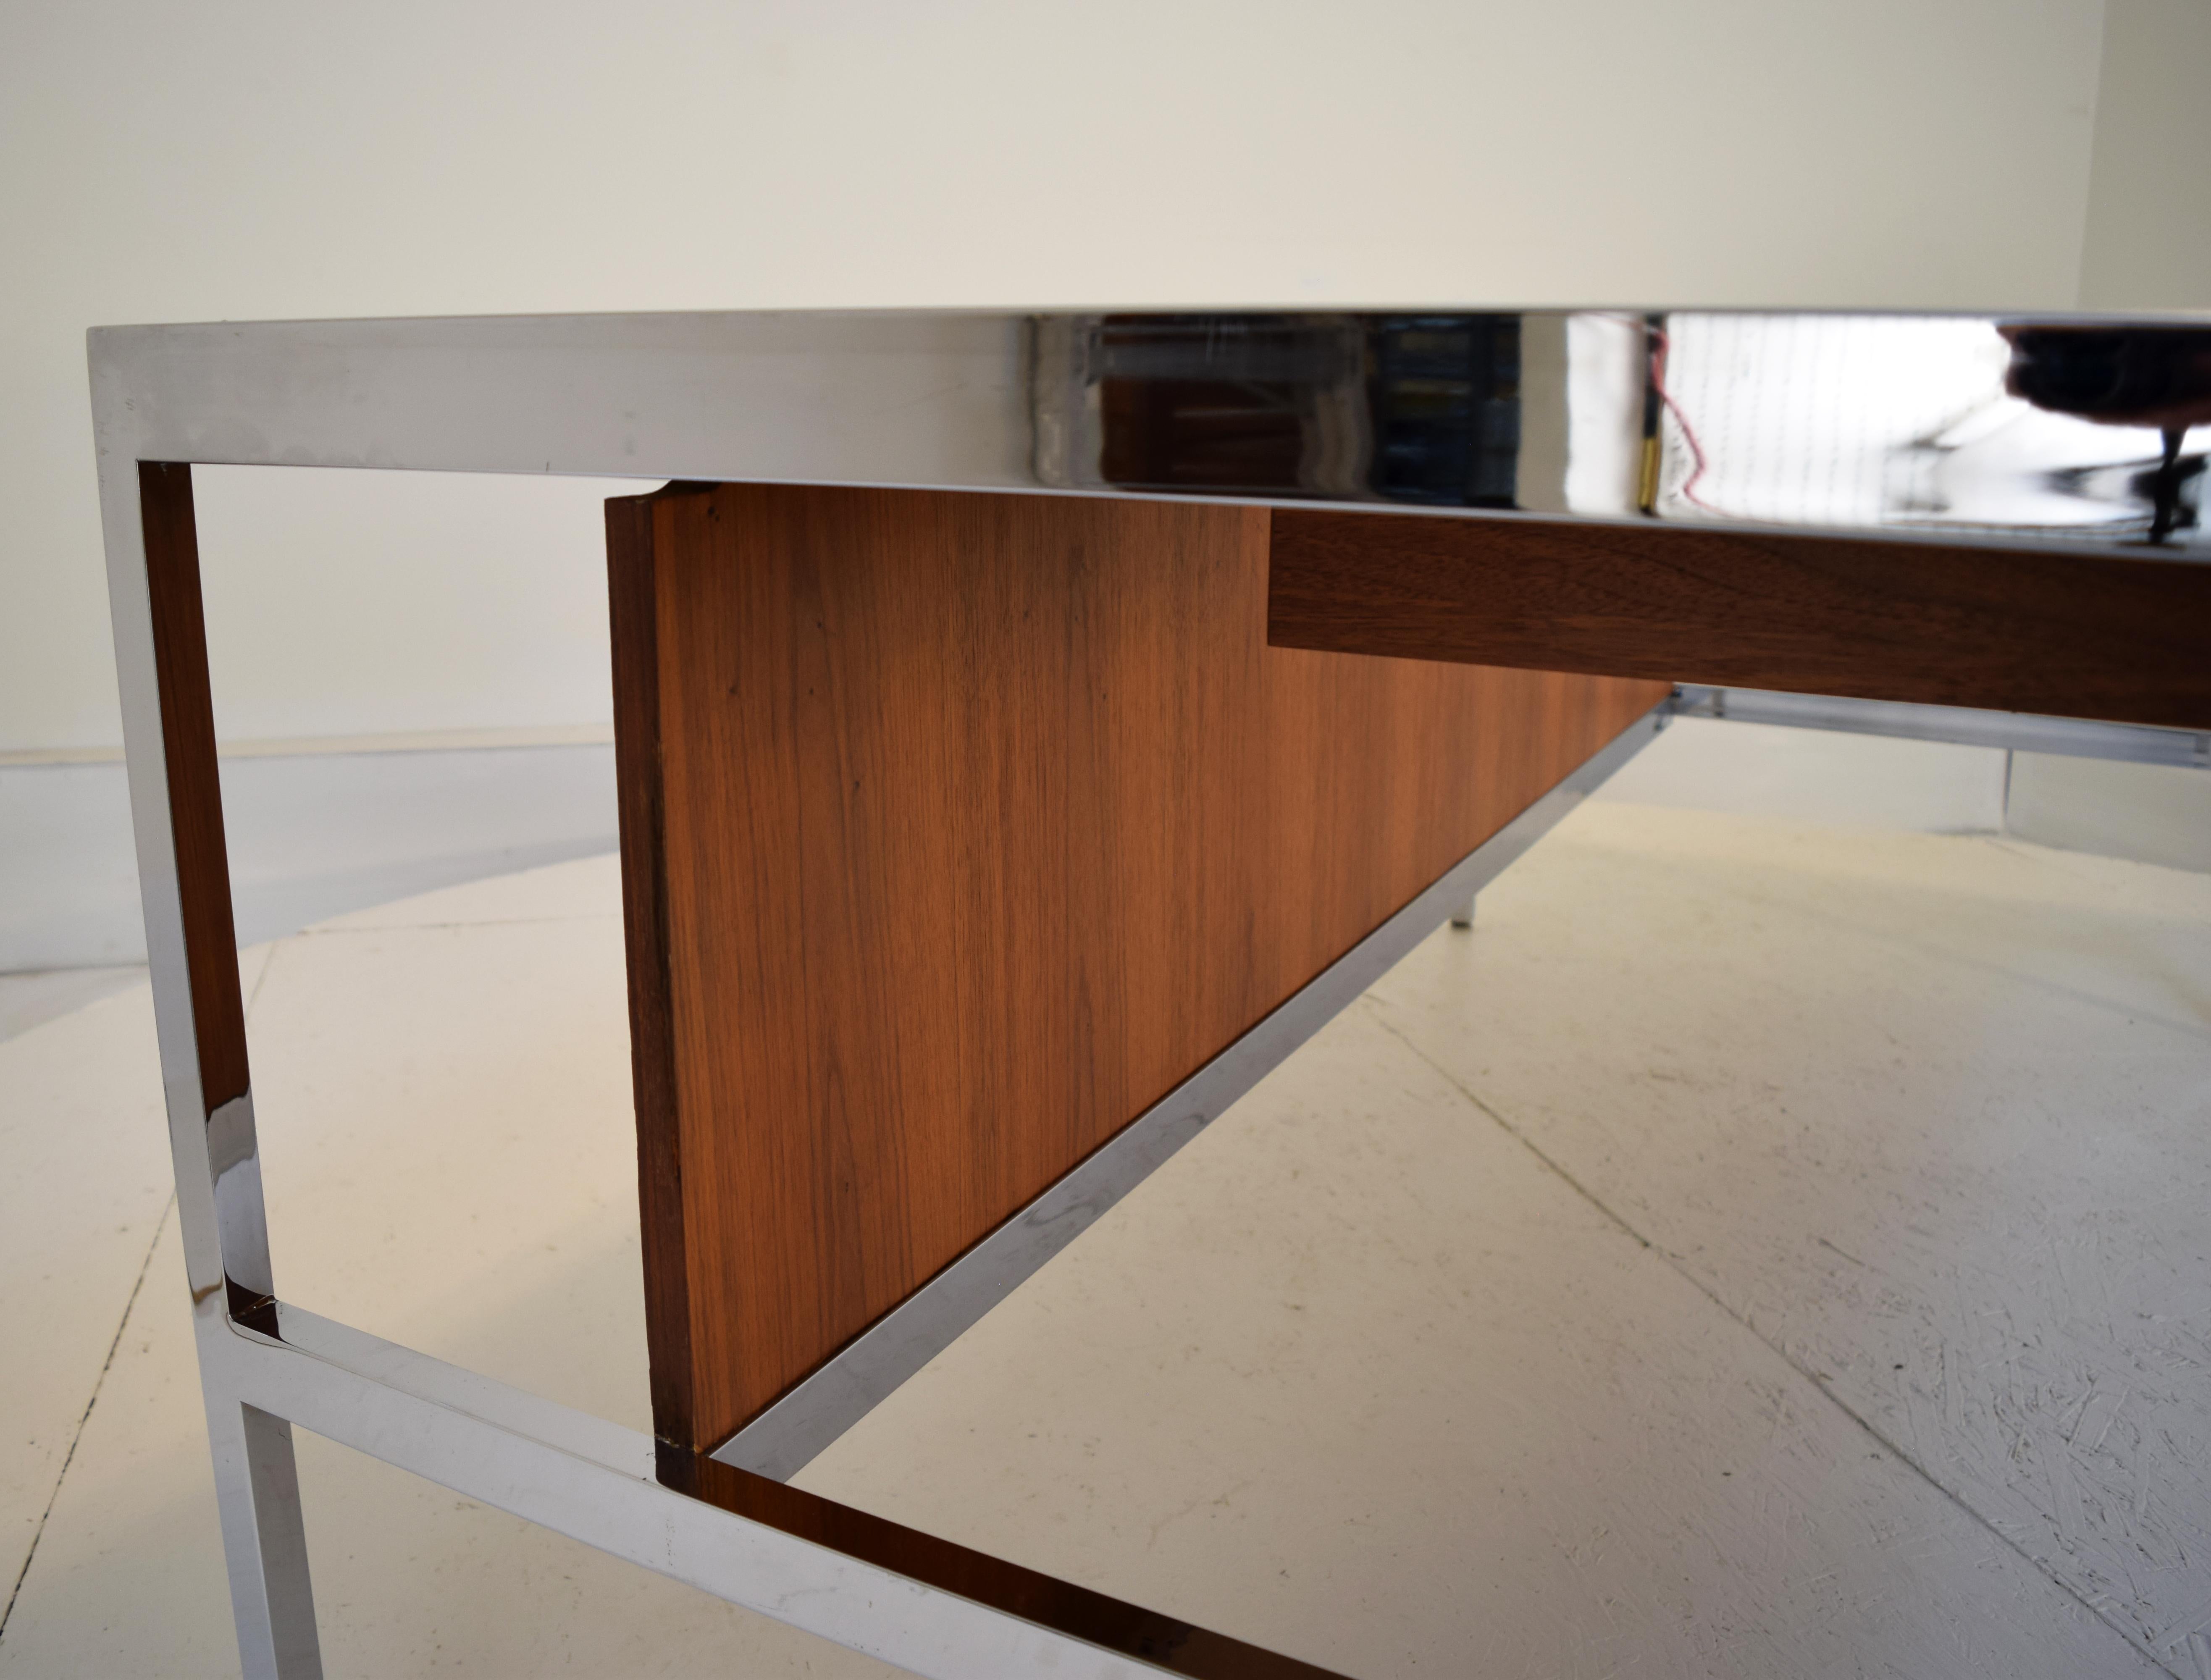 A beautiful modernist desk attributed to Gordon Bunshaft. It is unmarked however the design and construction strongly suggests it is his work with a minimalist approach. Produced circa 1970. A beautiful desk with rich walnut and solid steel frames